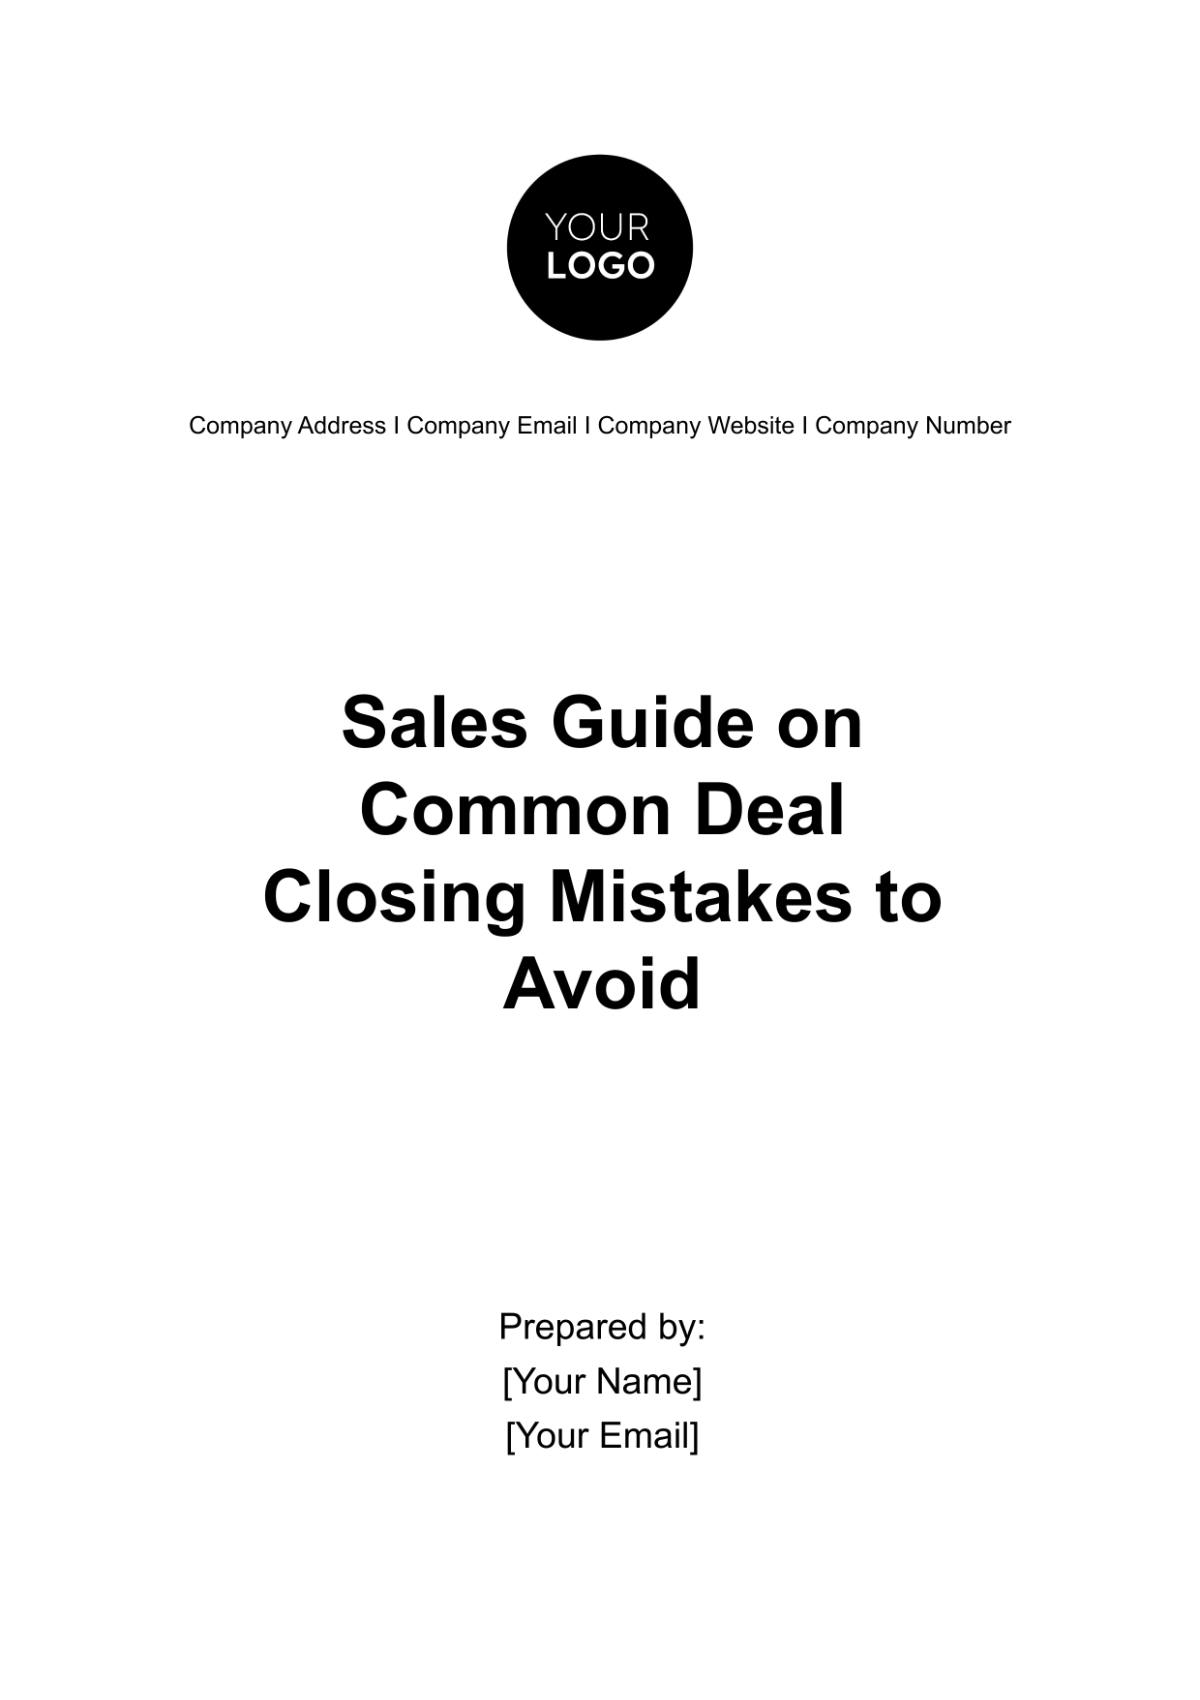 Free Sales Guide on Common Deal Closing Mistakes to Avoid Template